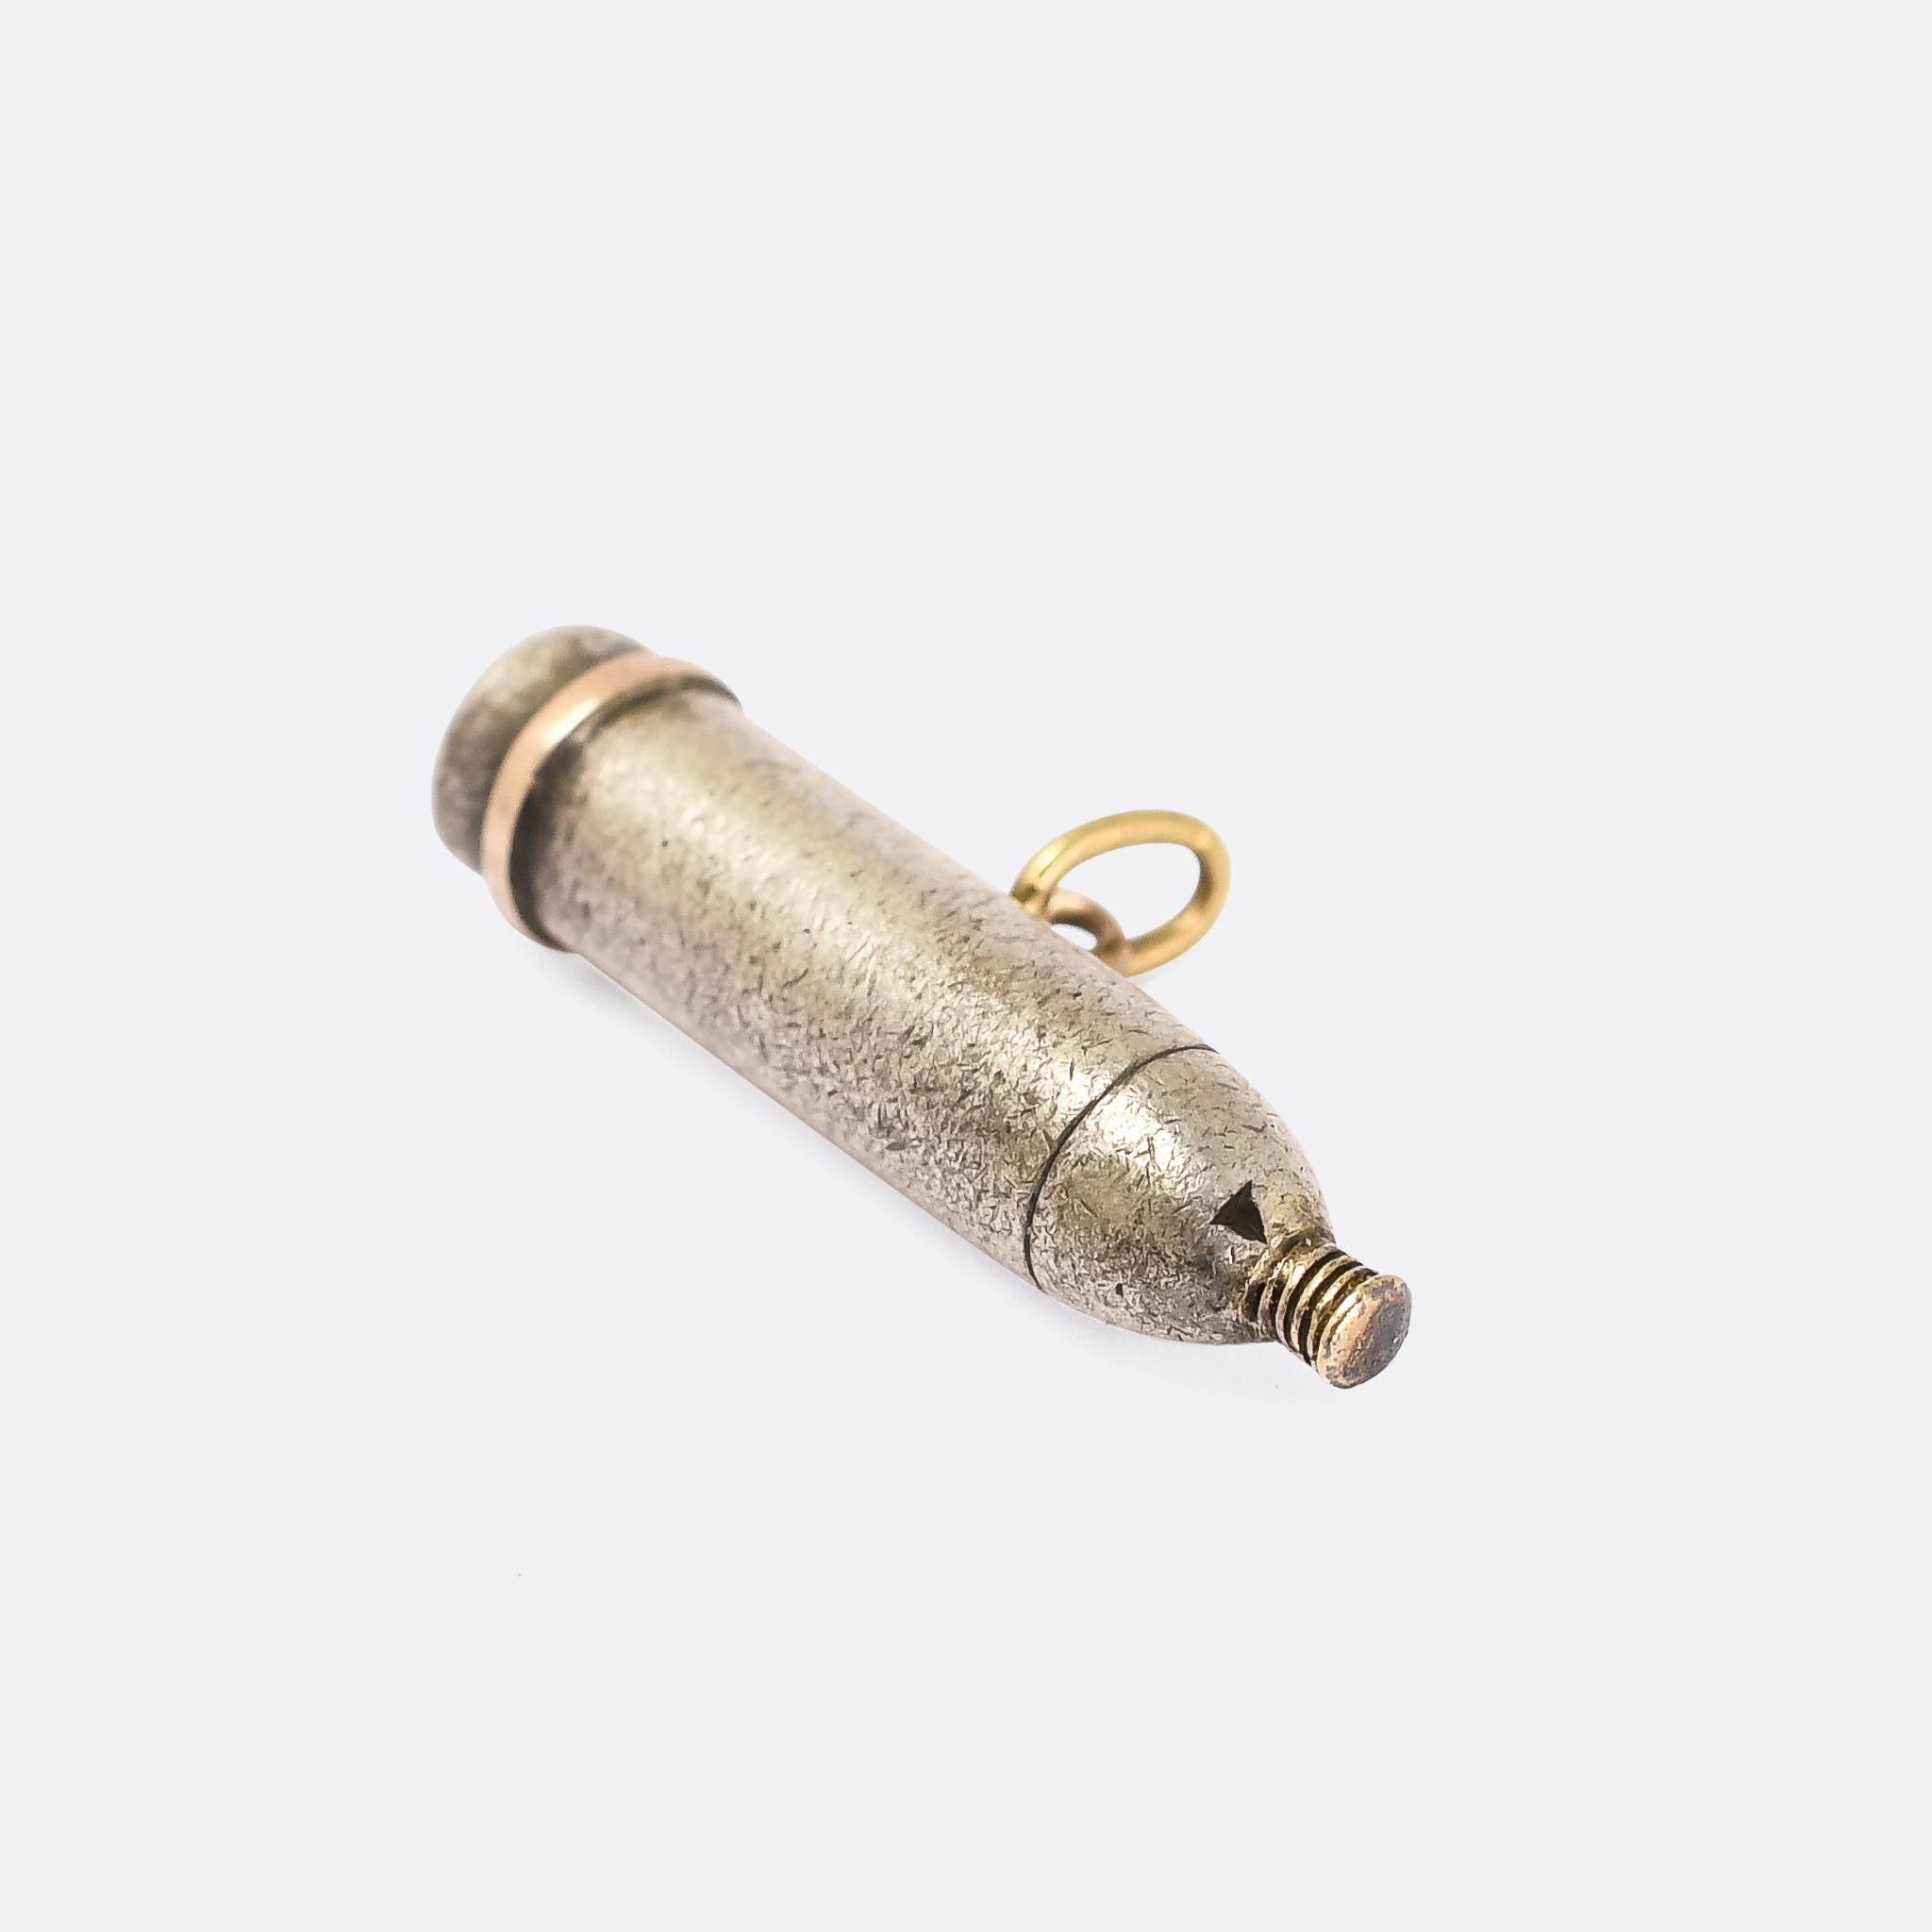 An unusual antique pendant modelled as a WW1 artillery shell. It's crafted in silver with gold fittings and details, with French marks and the date 1915 inscribed on the base. It's particularly well made, with strong attention to